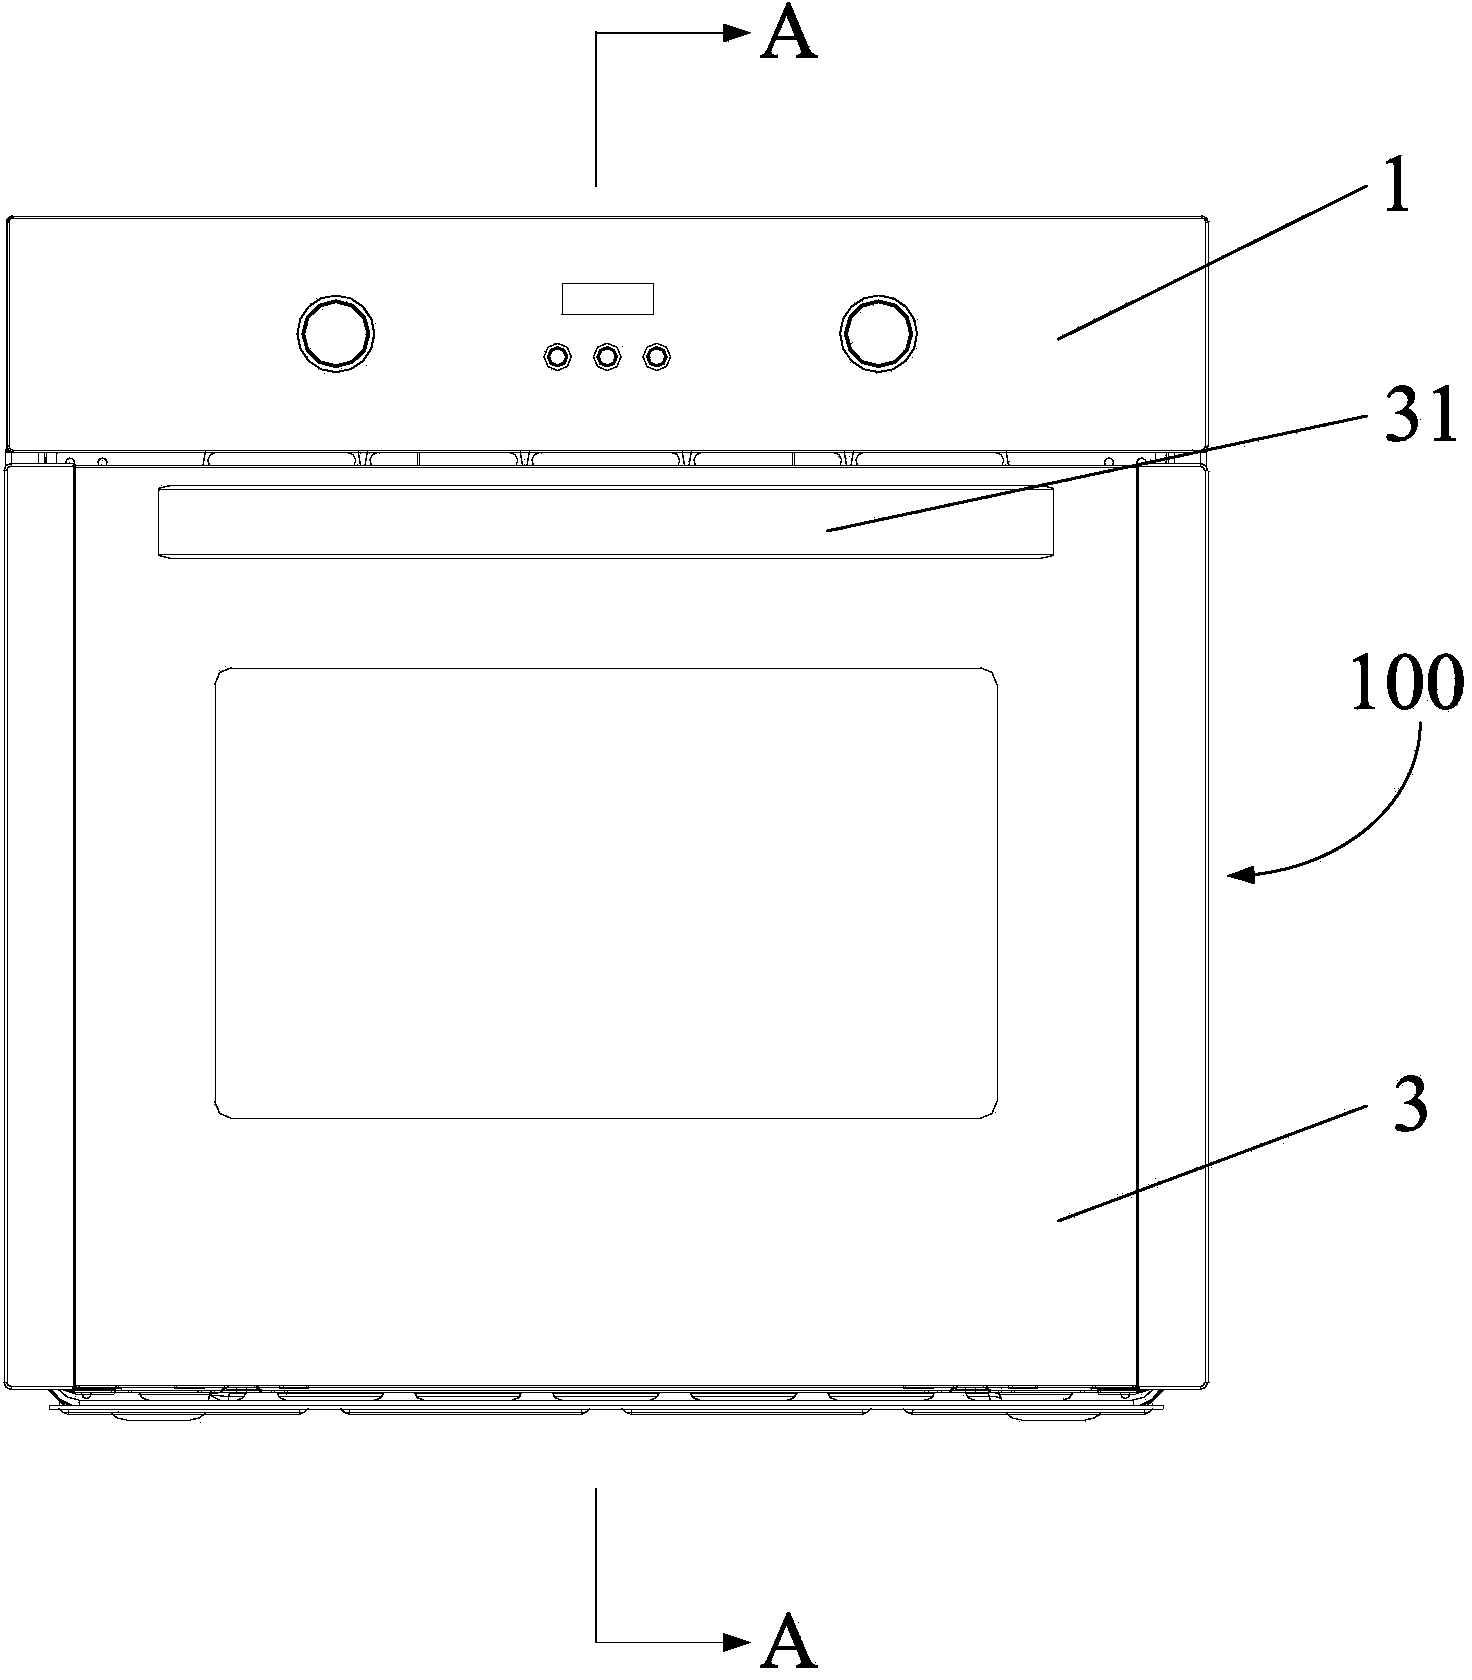 Heat dissipation system for oven and electric oven